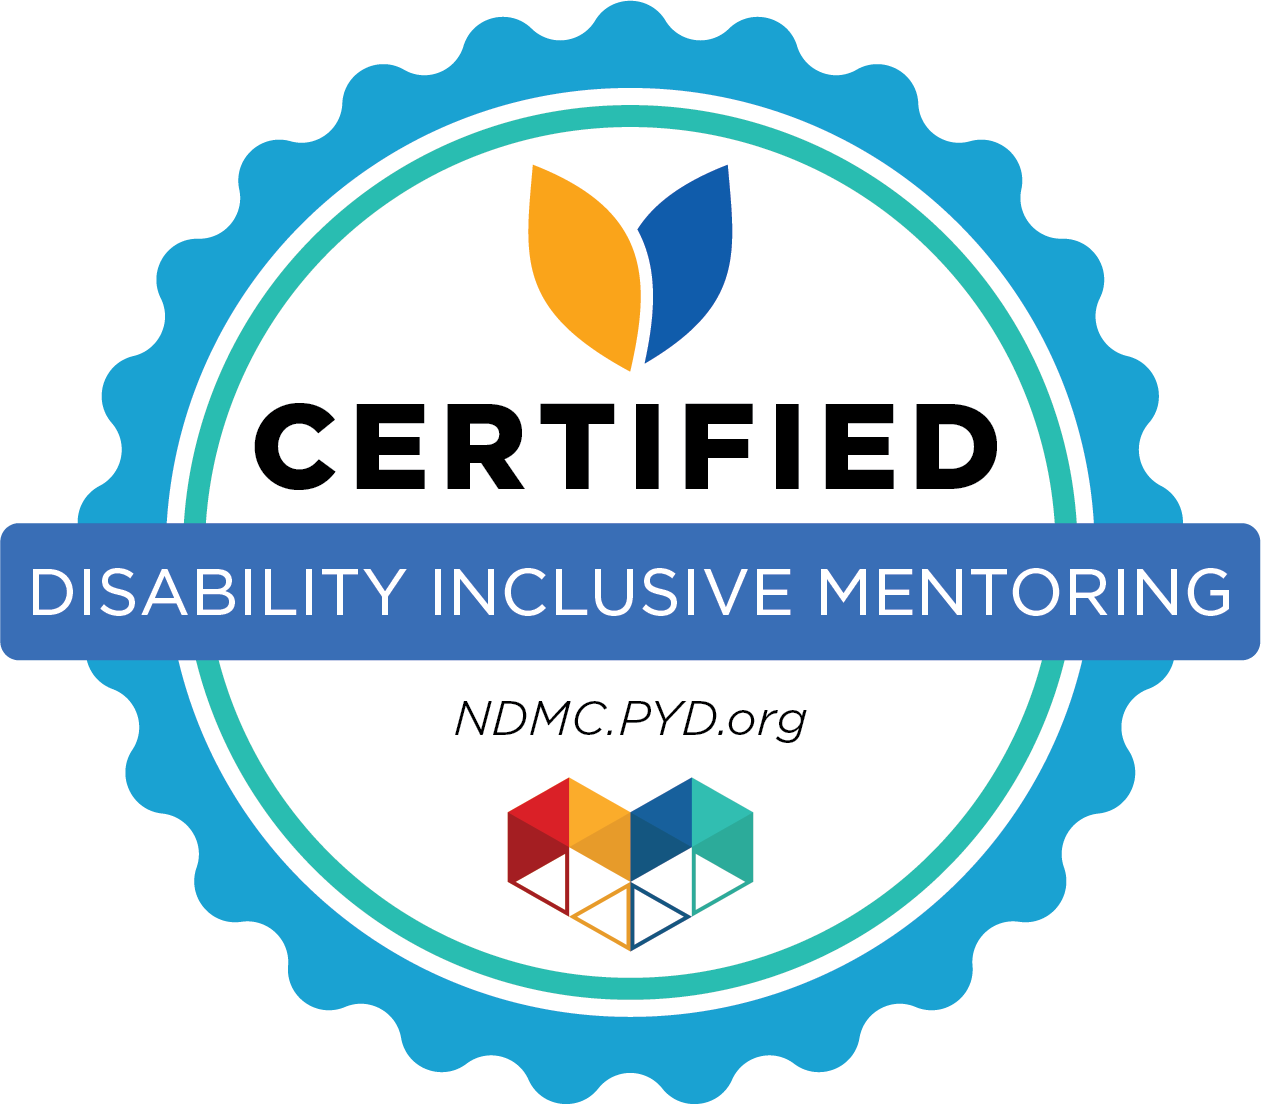 Cerified Disability Inclusive Mentoring graphic, NDMC.PYD.org